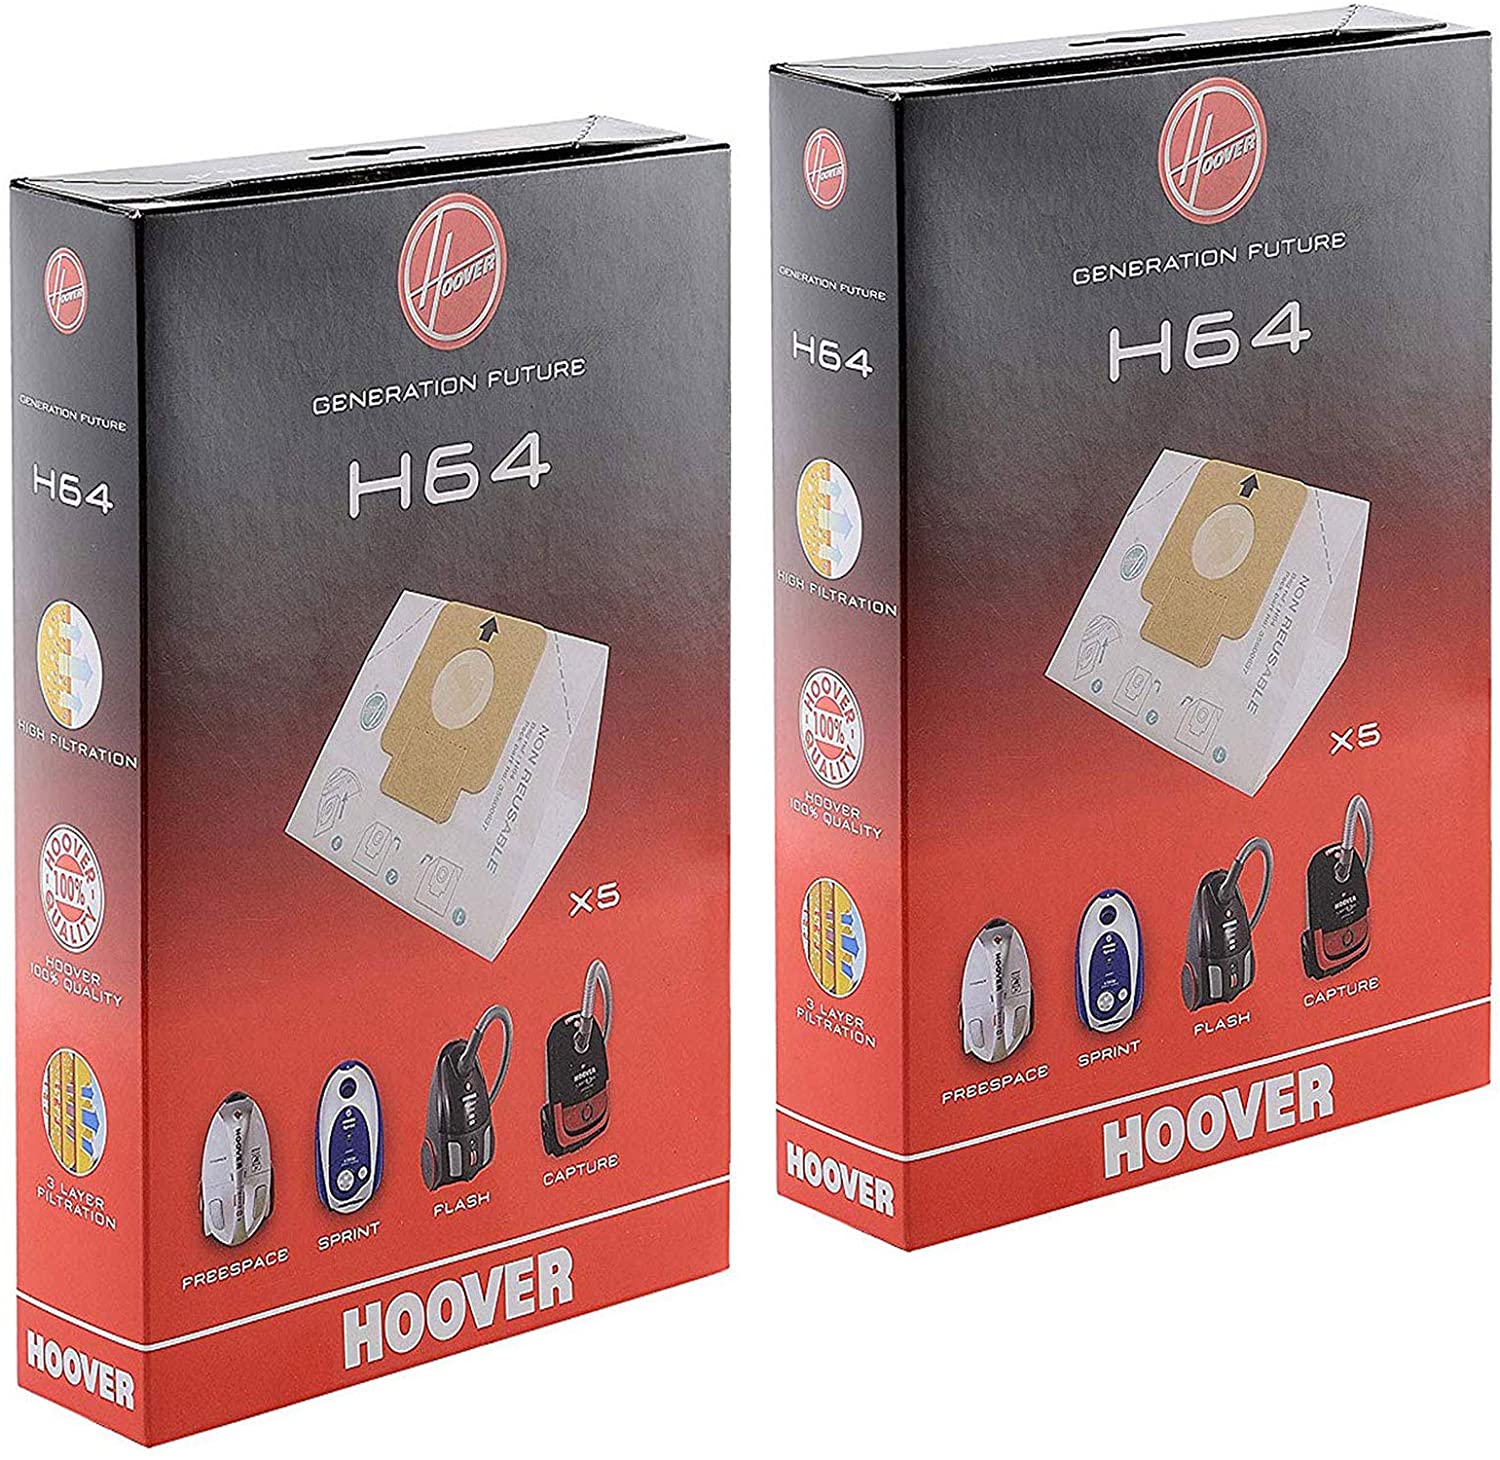 HOOVER Vacuum Cleaner H64 Dust Bag Genuine Freespace Sprint Flash Capture Cylinder 09200245 (Pack of 2)